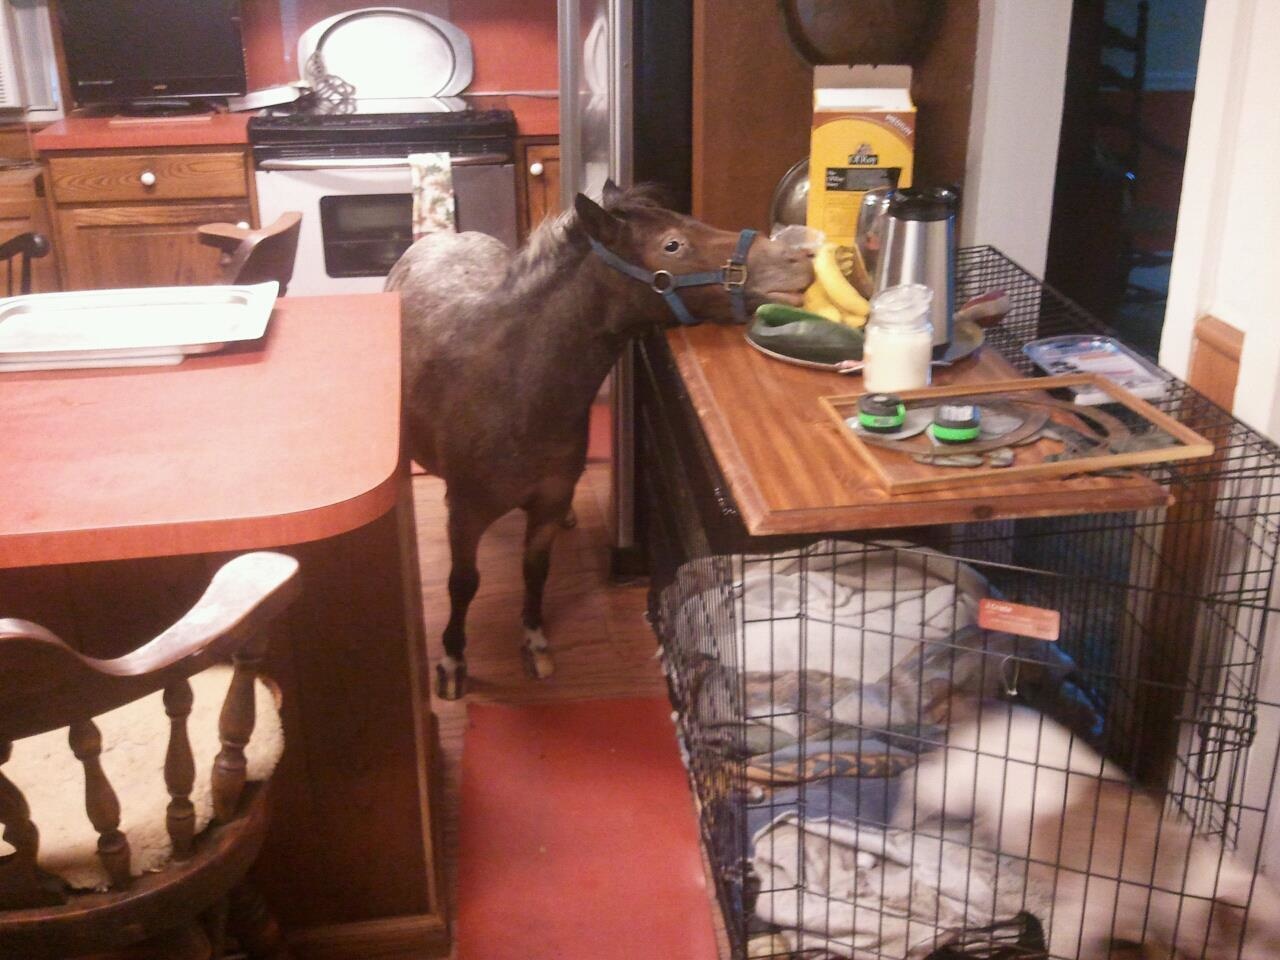 This is why we don't let miniature horses run amok in the house.